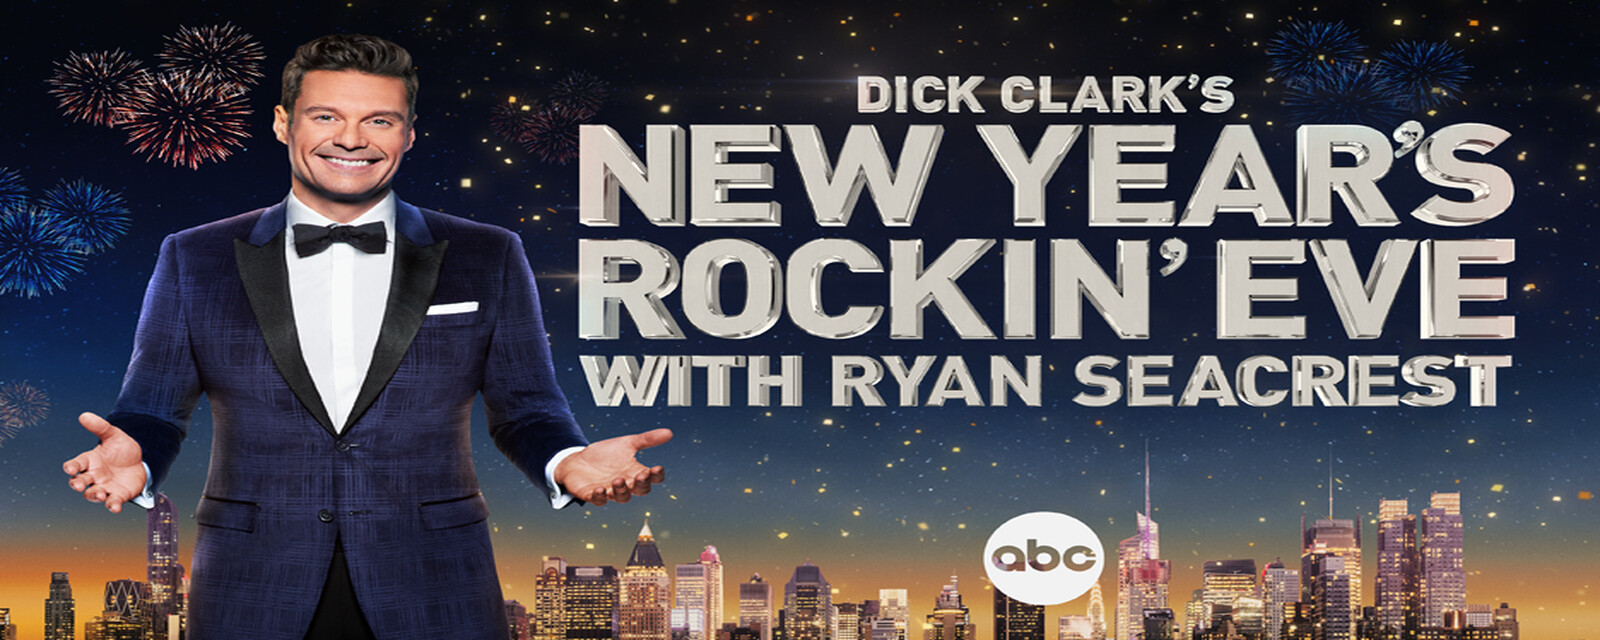 Watch 'Dick Clark's New Year's Rockin' Eve With Ryan Seacrest 2023′ Dick Clark's New Year's